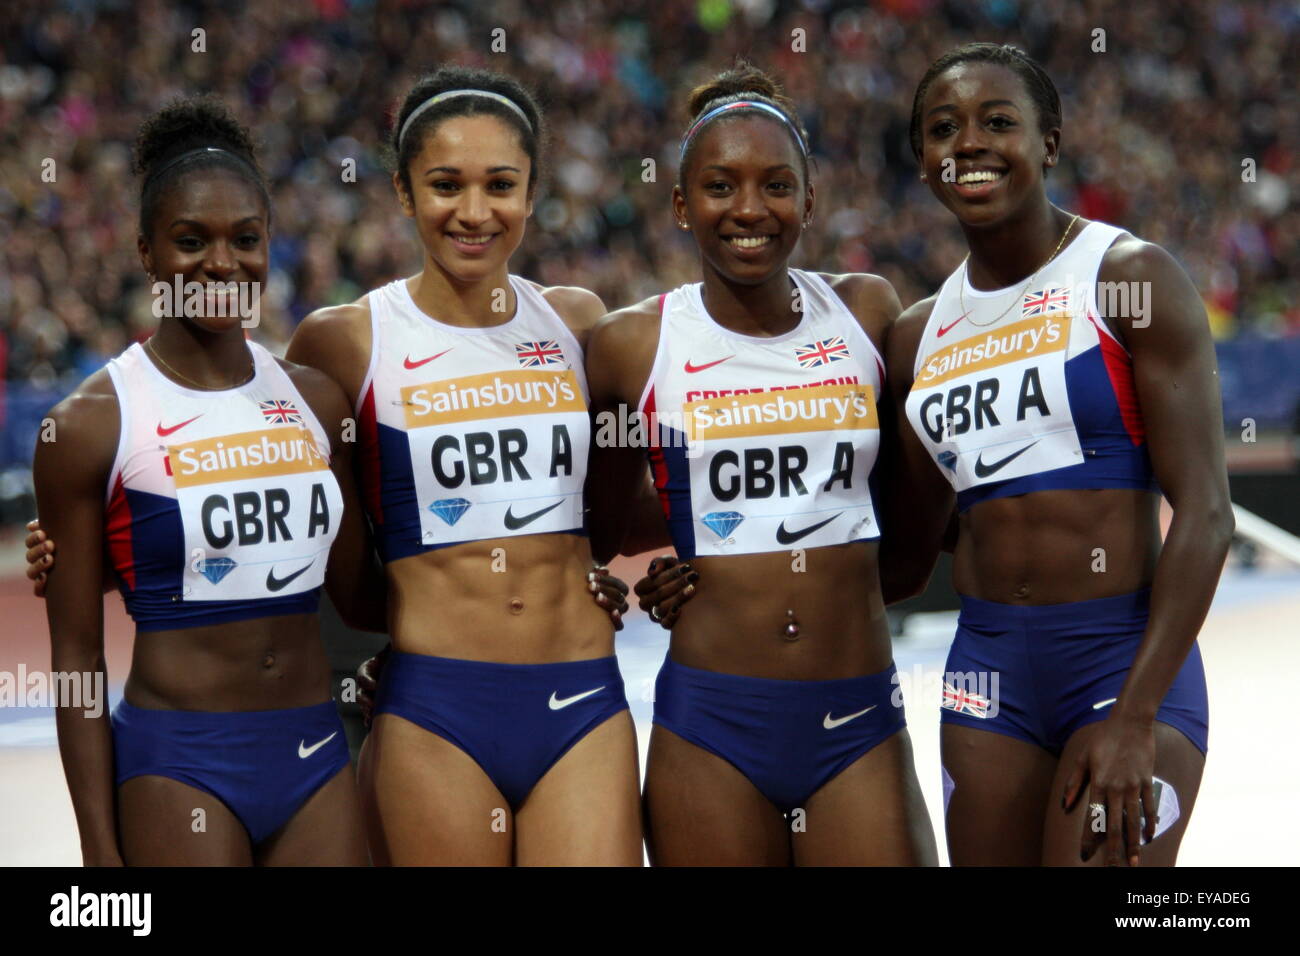 London, UK. 24th July, 2015. Women's 4x100m relay - Team GBR A Dina Asha, Jodie Williams, Bianca Williams, Desiree Henry-Smith in the Sainsbury’s Anniversary Games Diamond League event at The Queen Elizabeth Olympic Park on July 24, 2015 in London, UK Credit:  Grant Burton/Alamy Live News Stock Photo